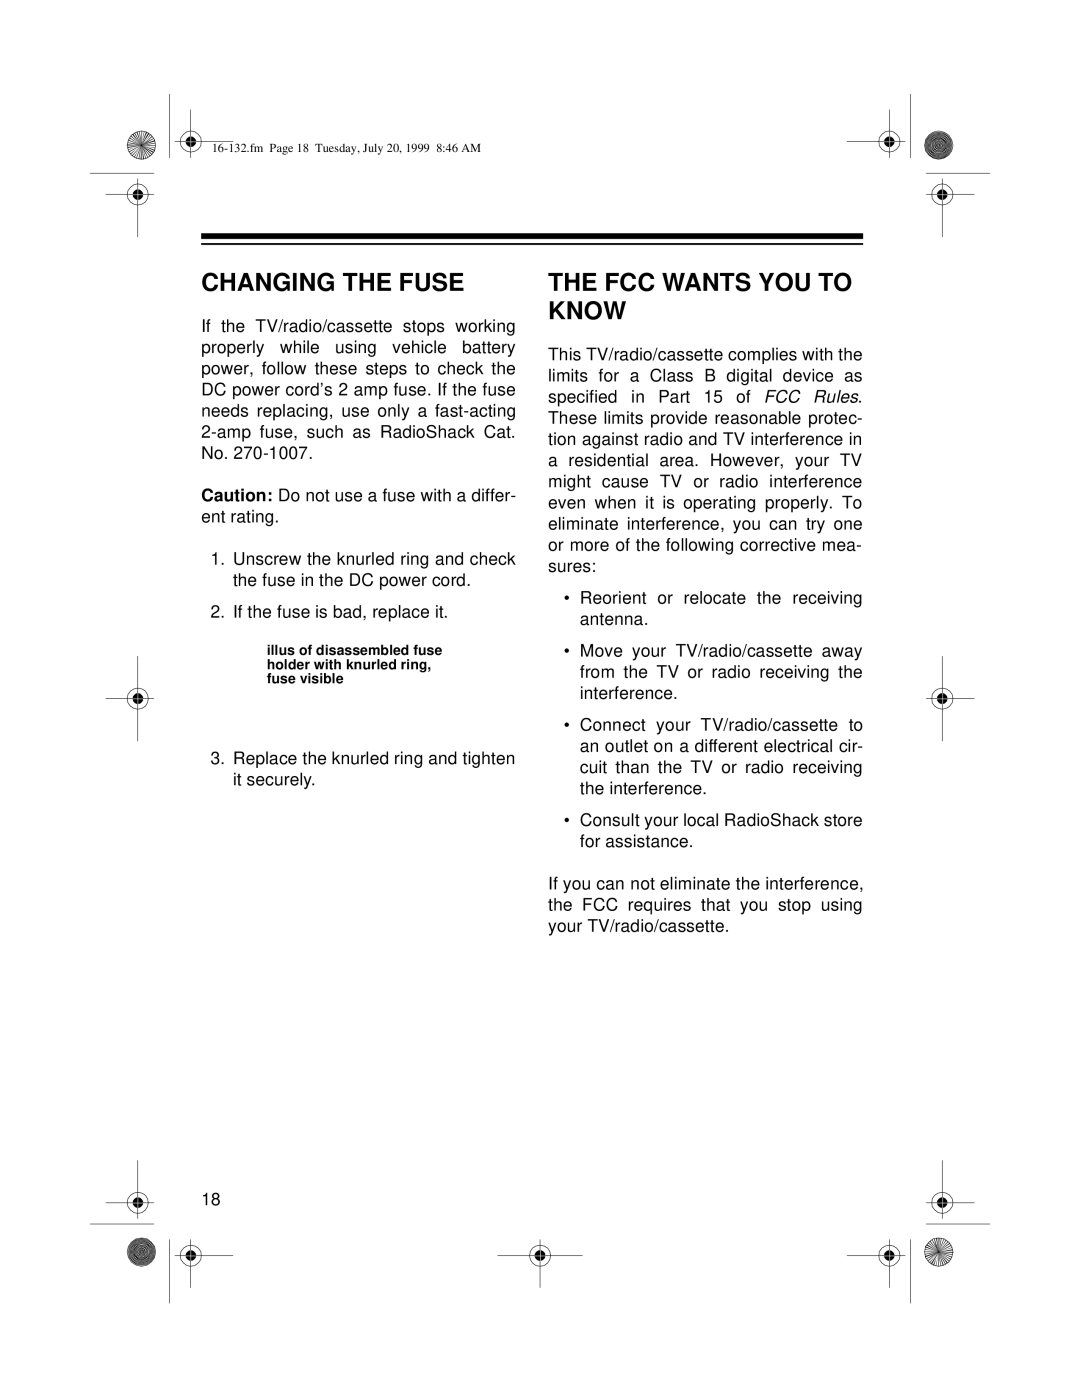 Optimus 16-132 owner manual Changing The Fuse, The Fcc Wants You To Know 